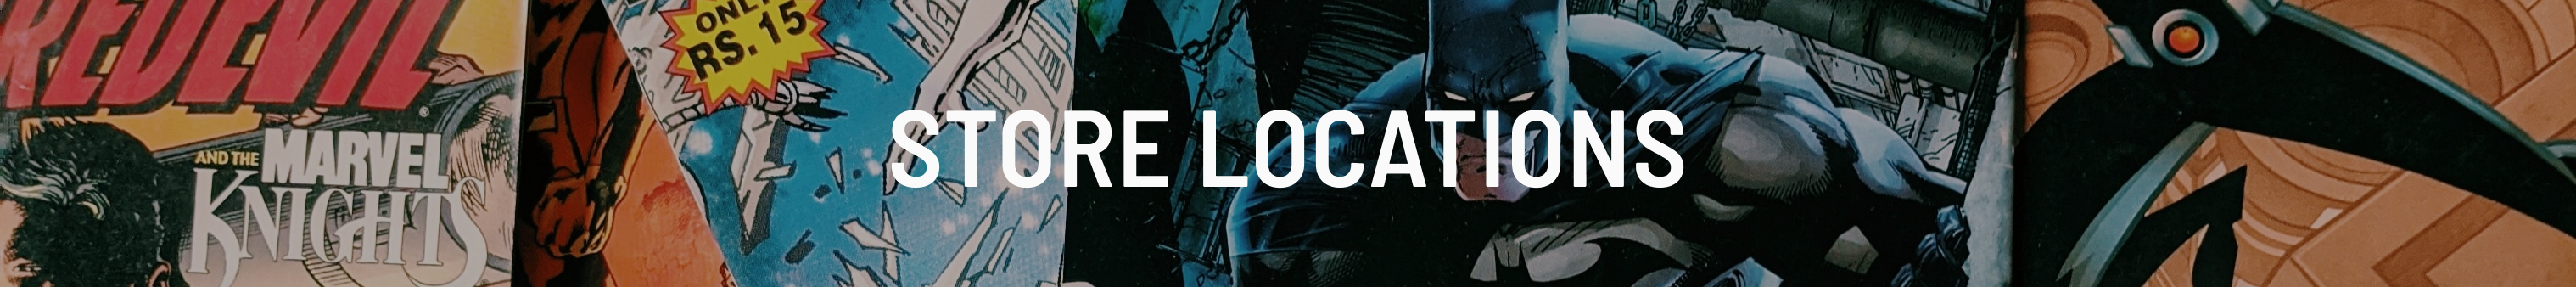 Locations banner